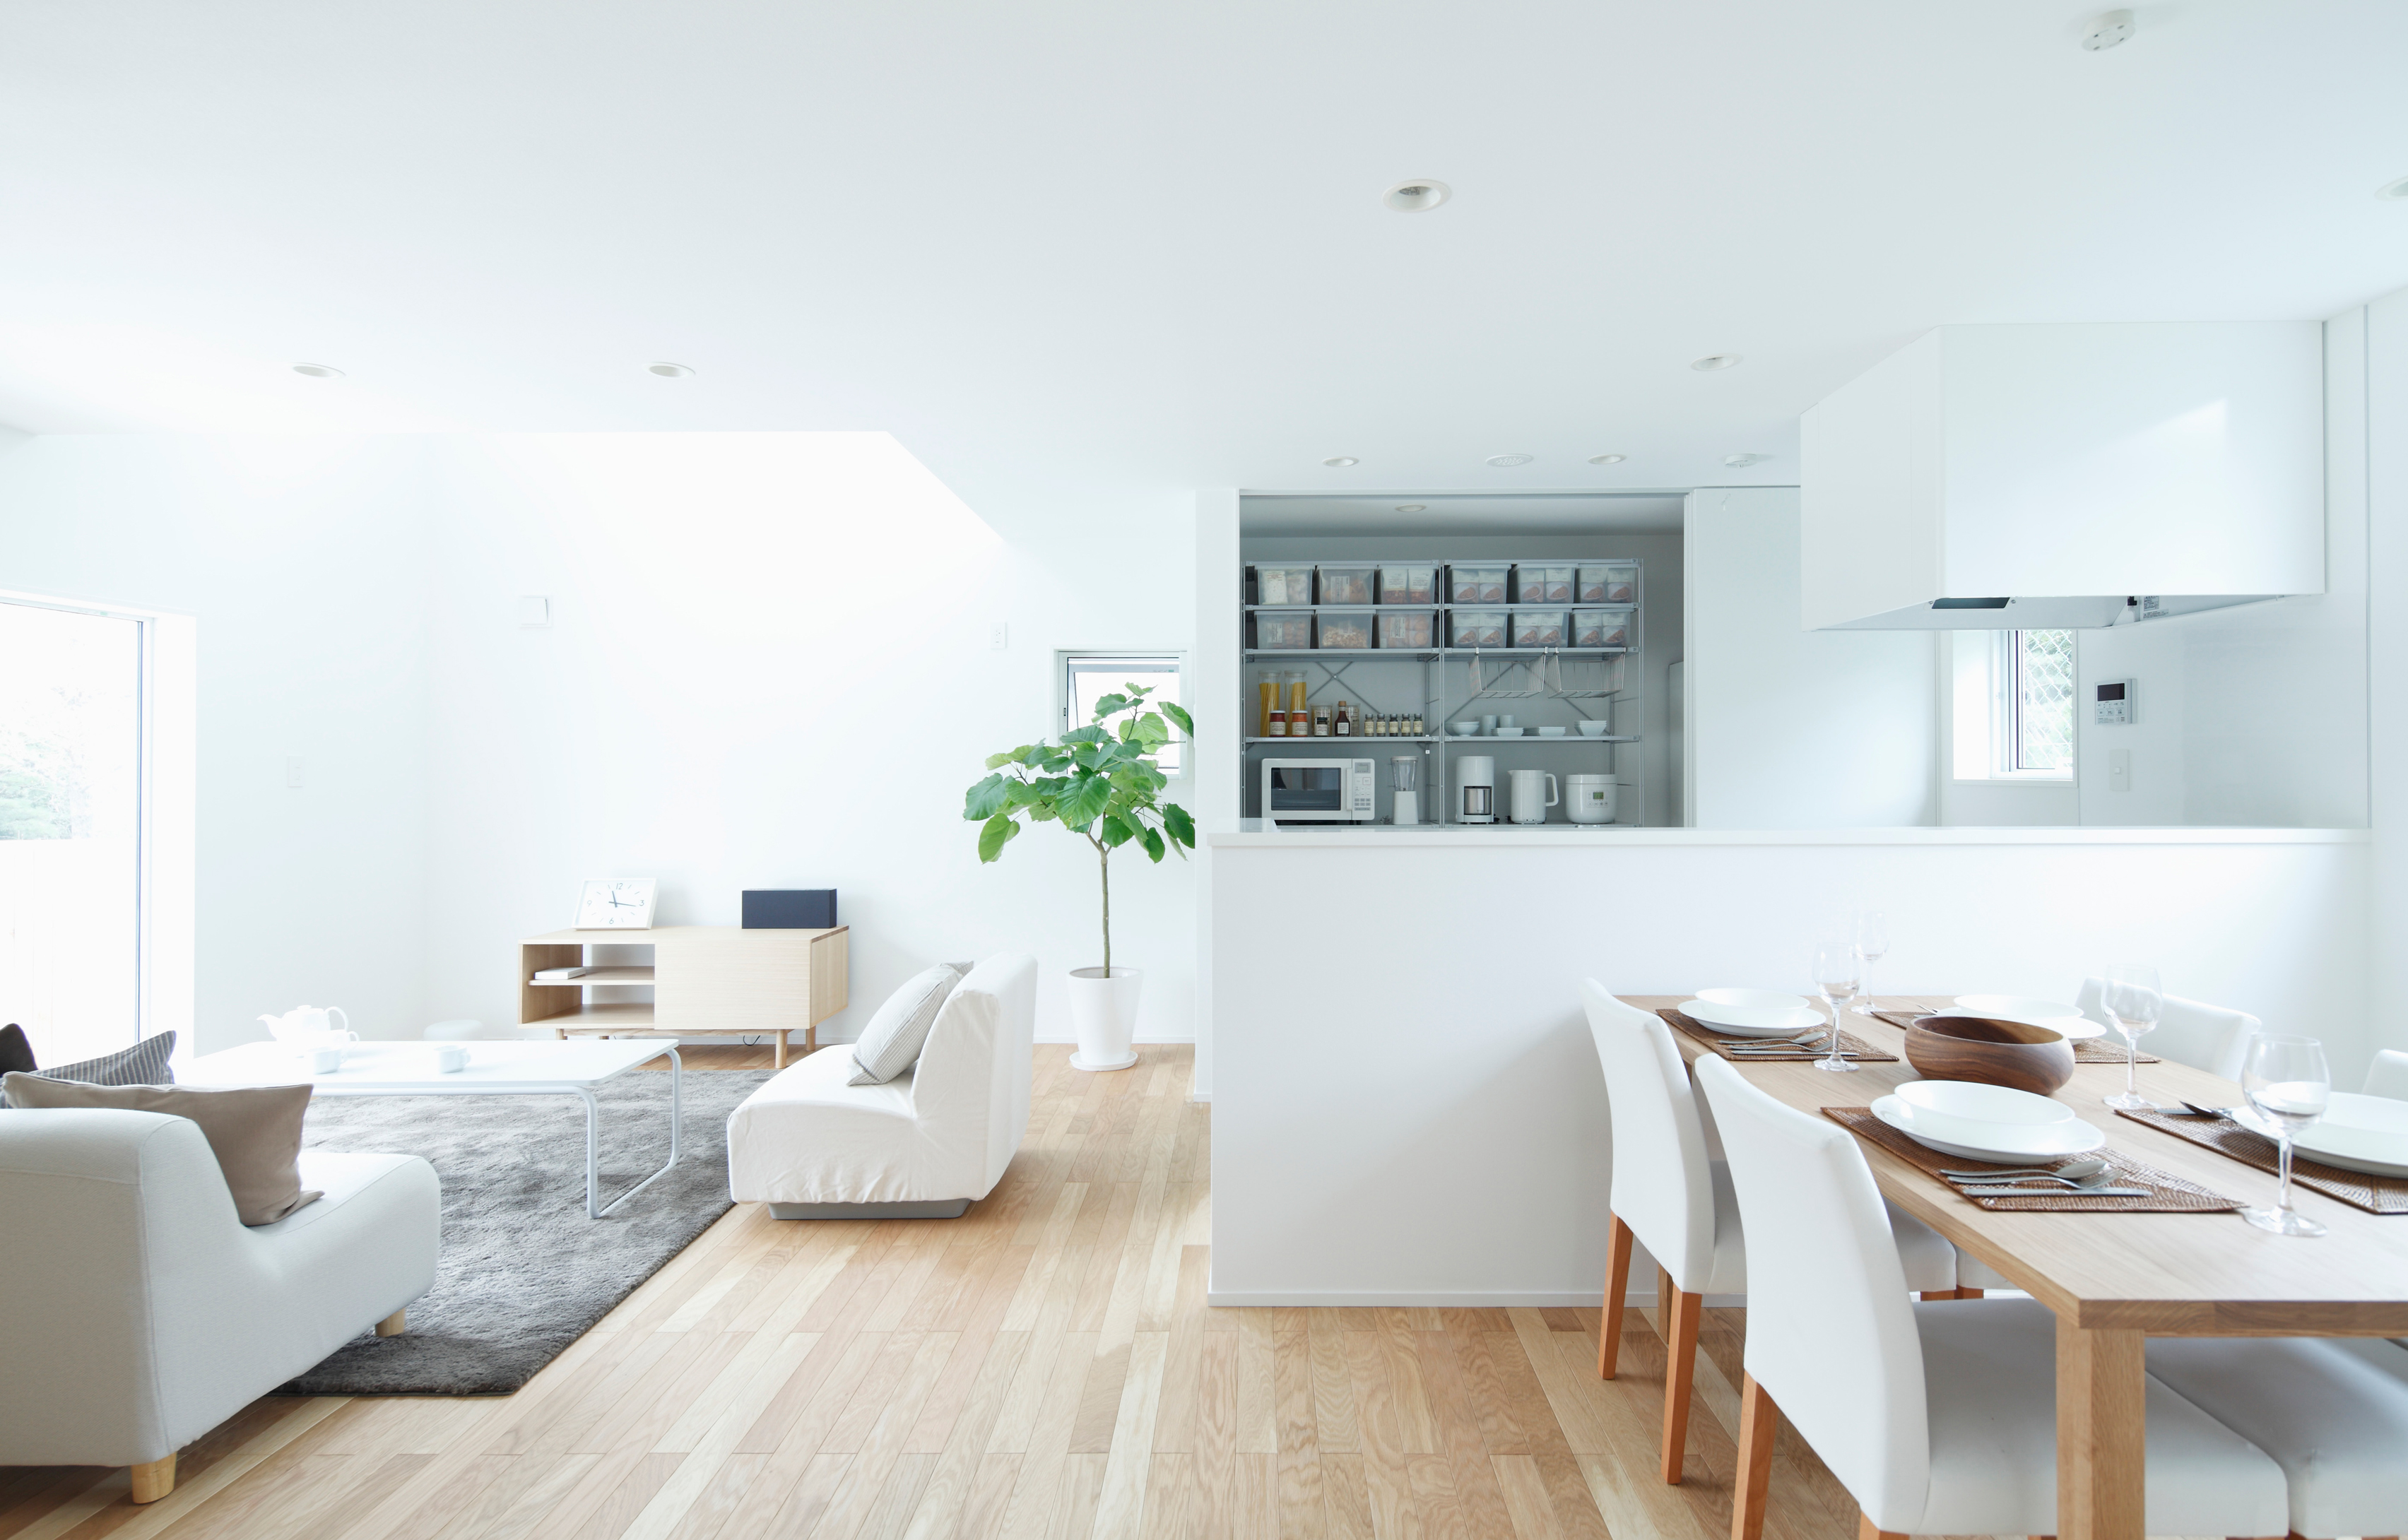 Muji to test prefab house by letting a competition winner live in it for free